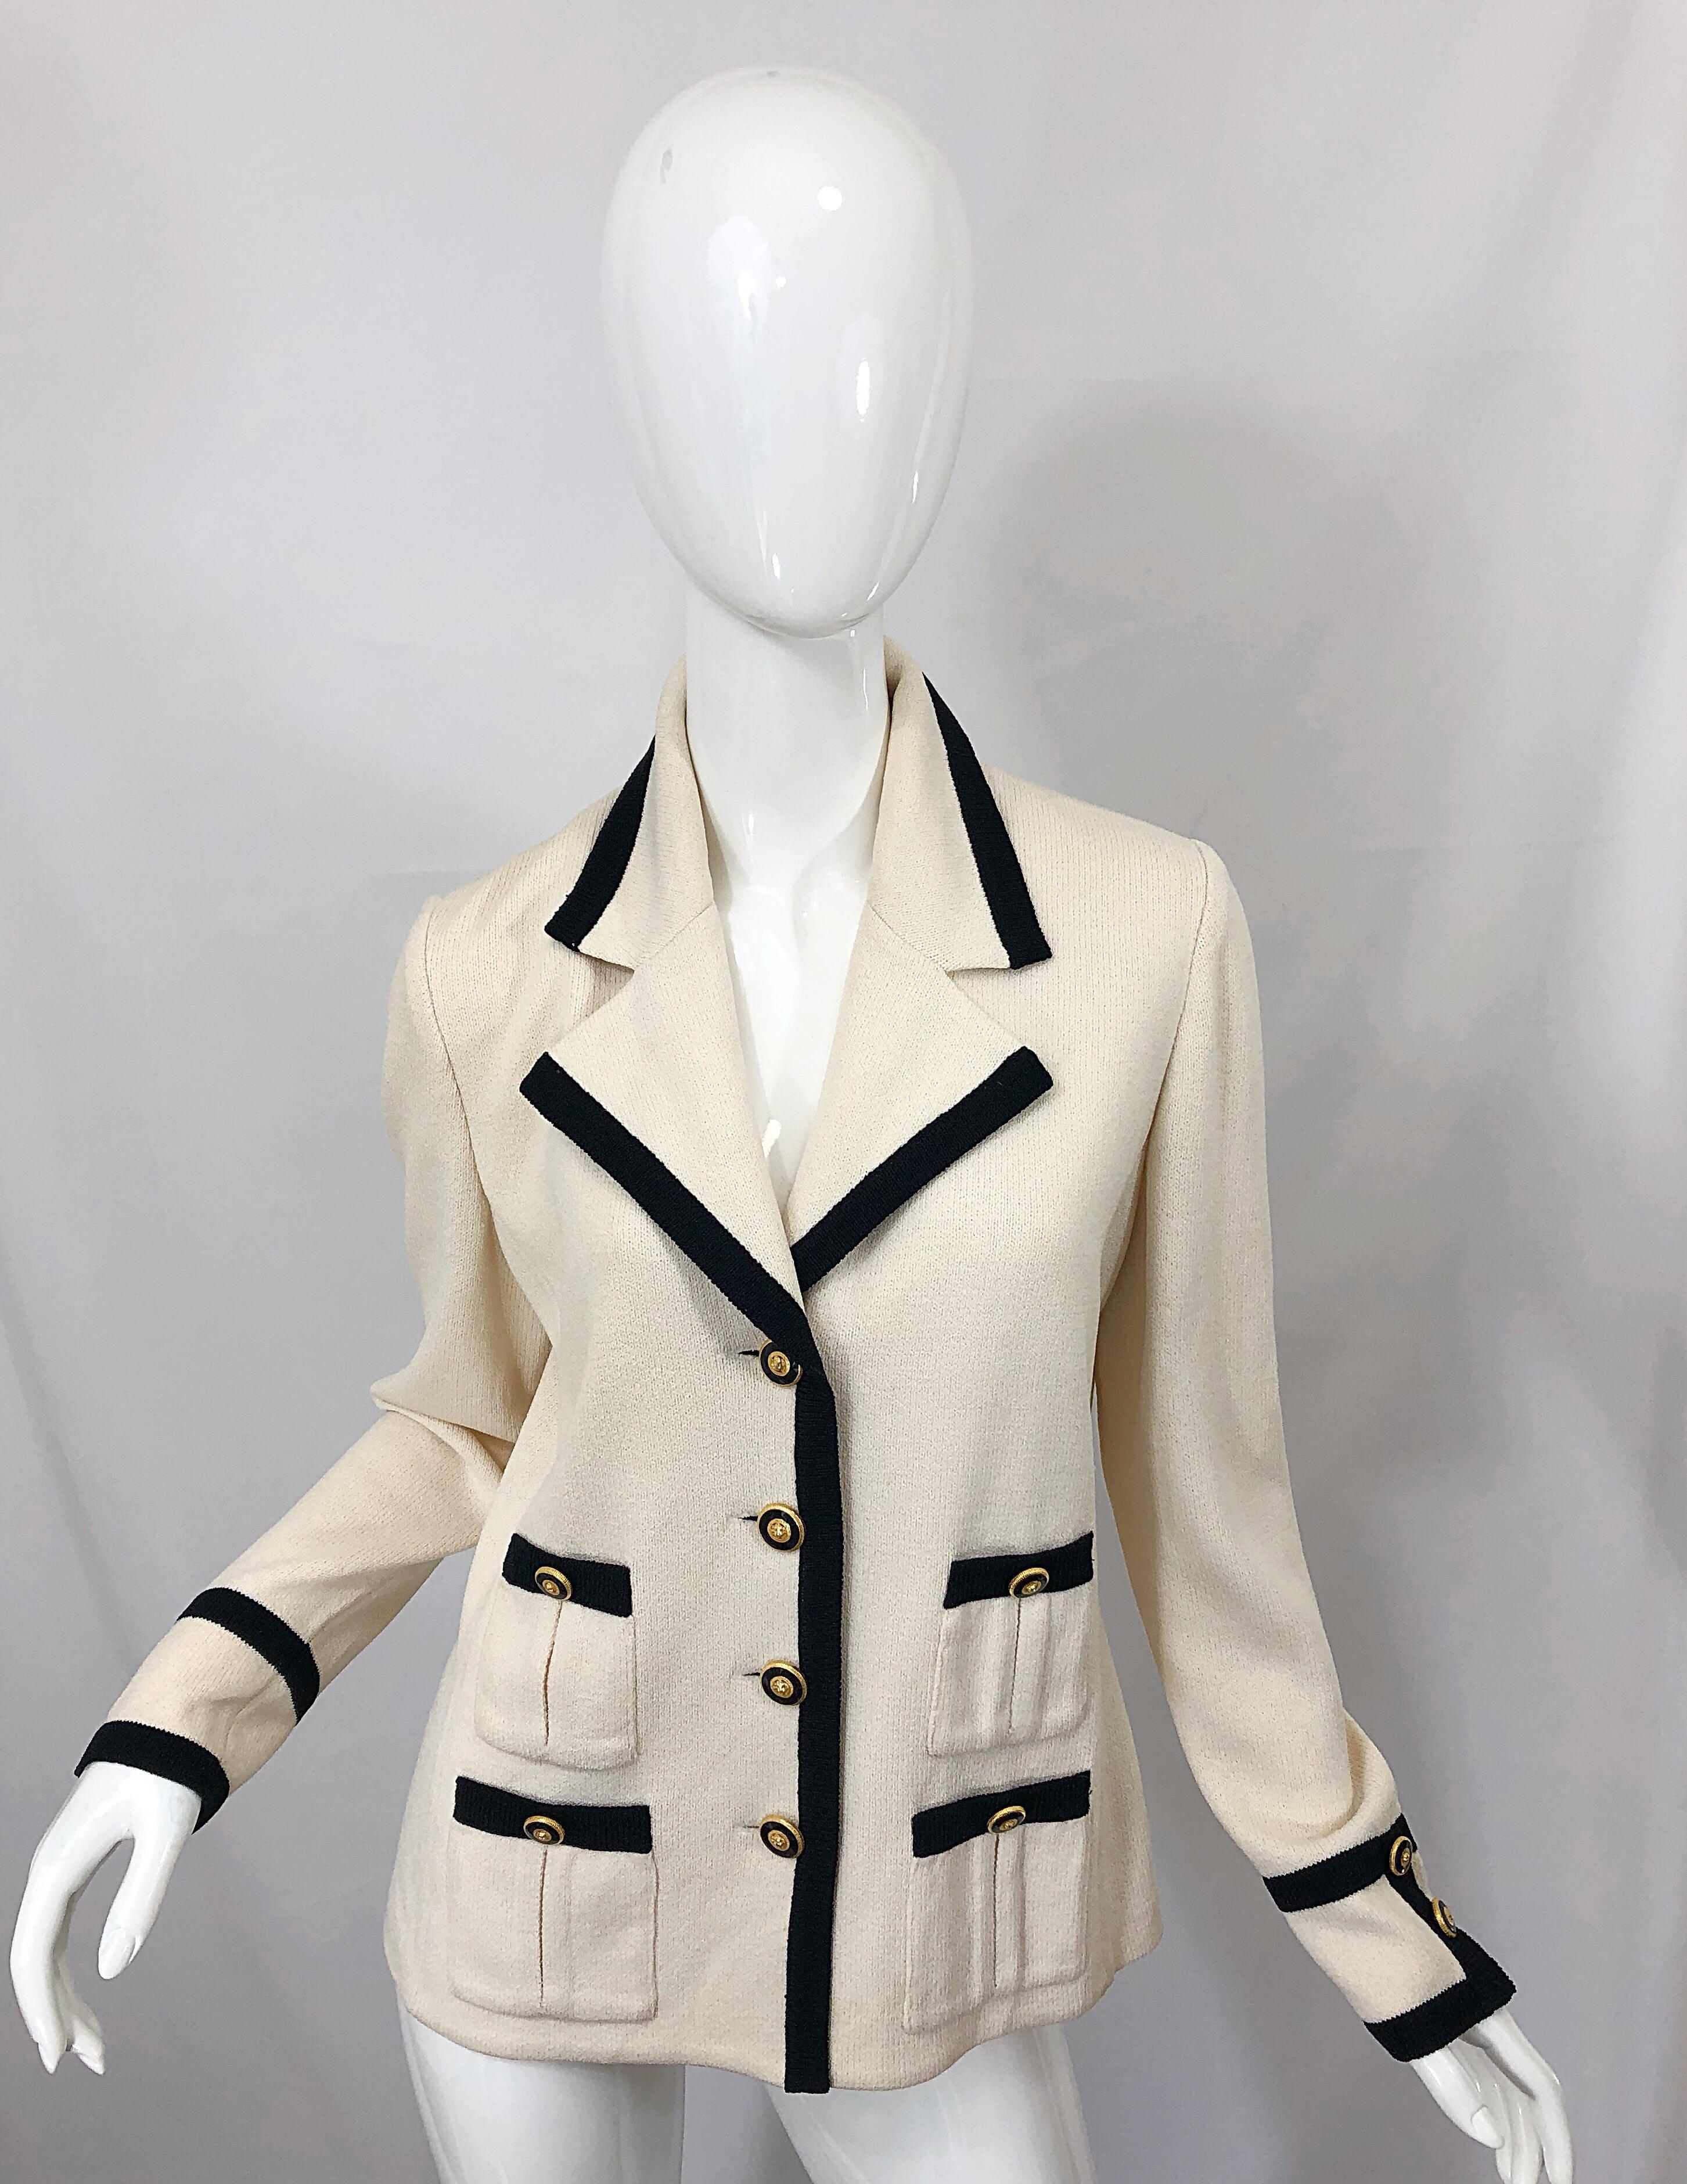 Chic and classic vintage ST. JOHN 1990s ivory and black santana knit blazer jacket! Features four black and gold buttons up the front and at each sleeve cuff. Black trim throughout. Comfortable stretch knit that looks great on, and is super